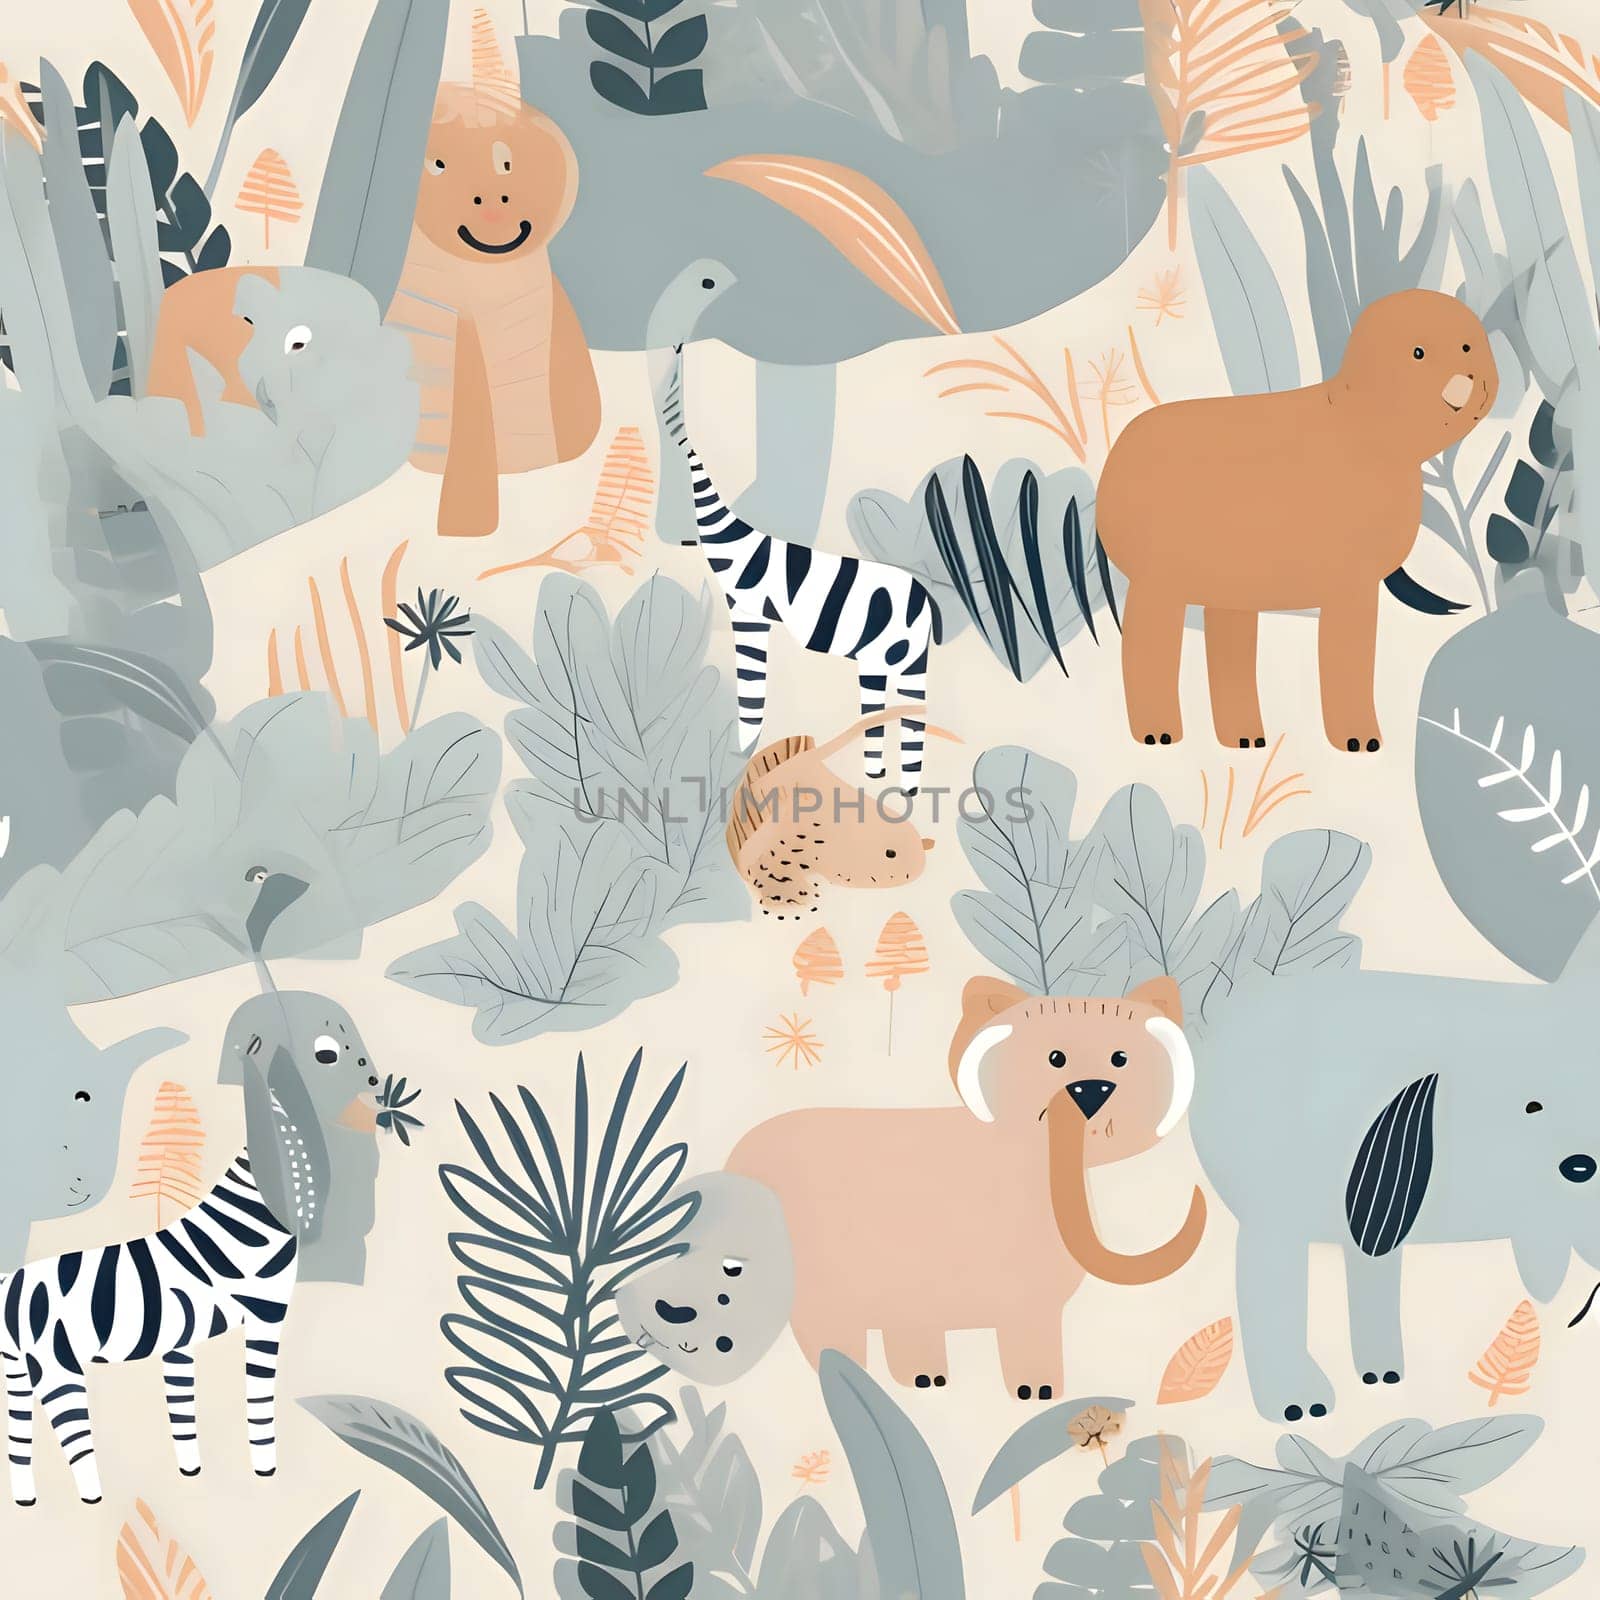 Patterns and banners backgrounds: Seamless pattern with cute animals and tropical leaves. Vector illustration.